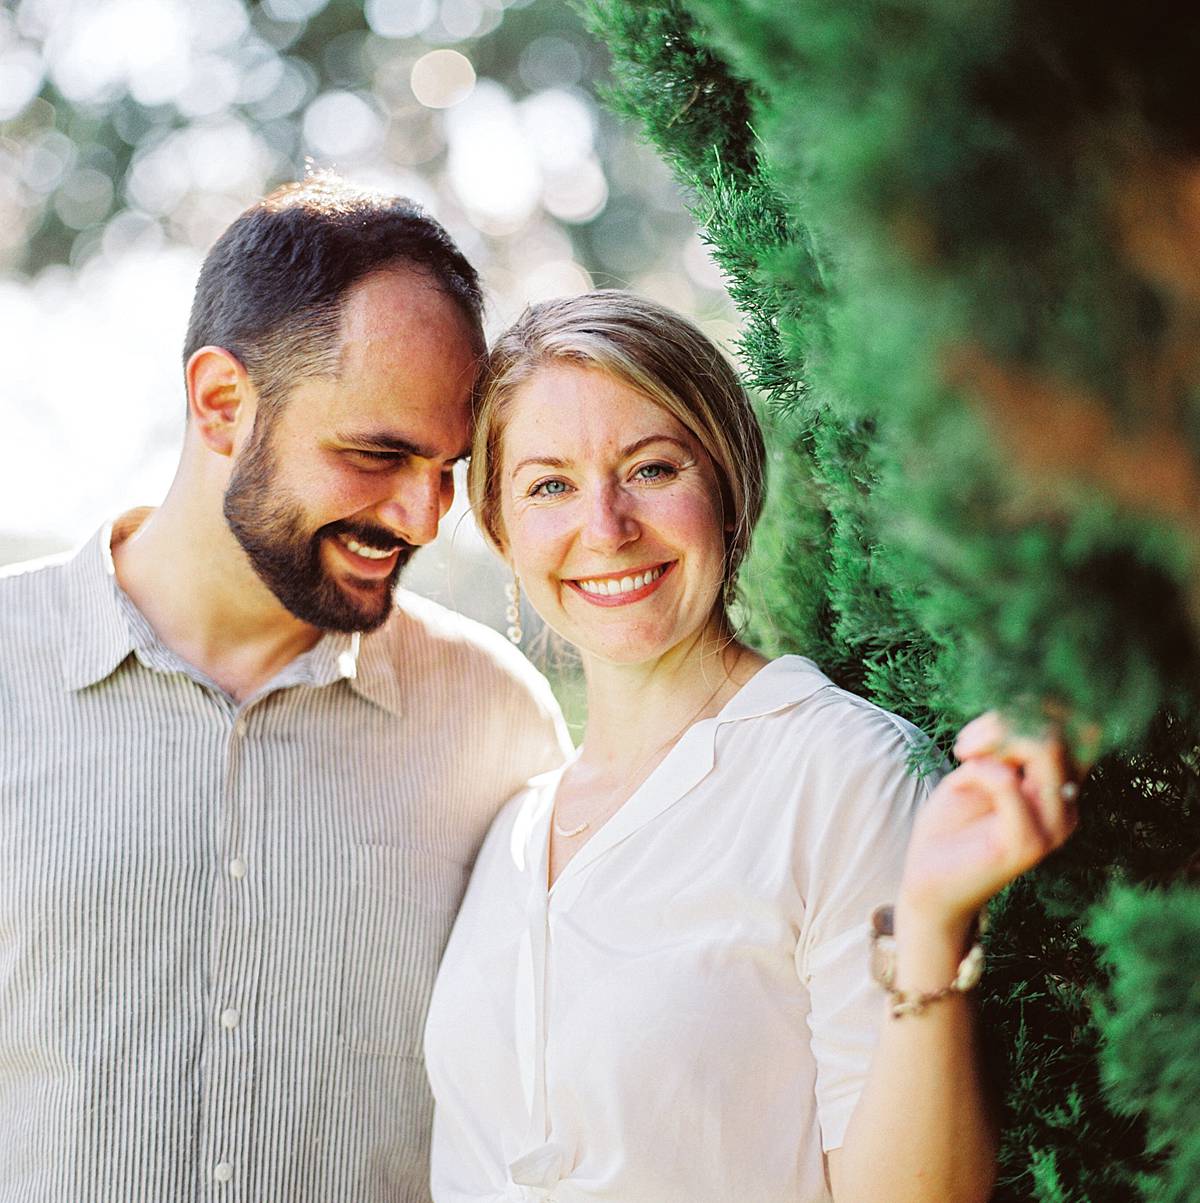 engagement photography by brian d smith photography at middleton place in charleston sc on kodak medium format film